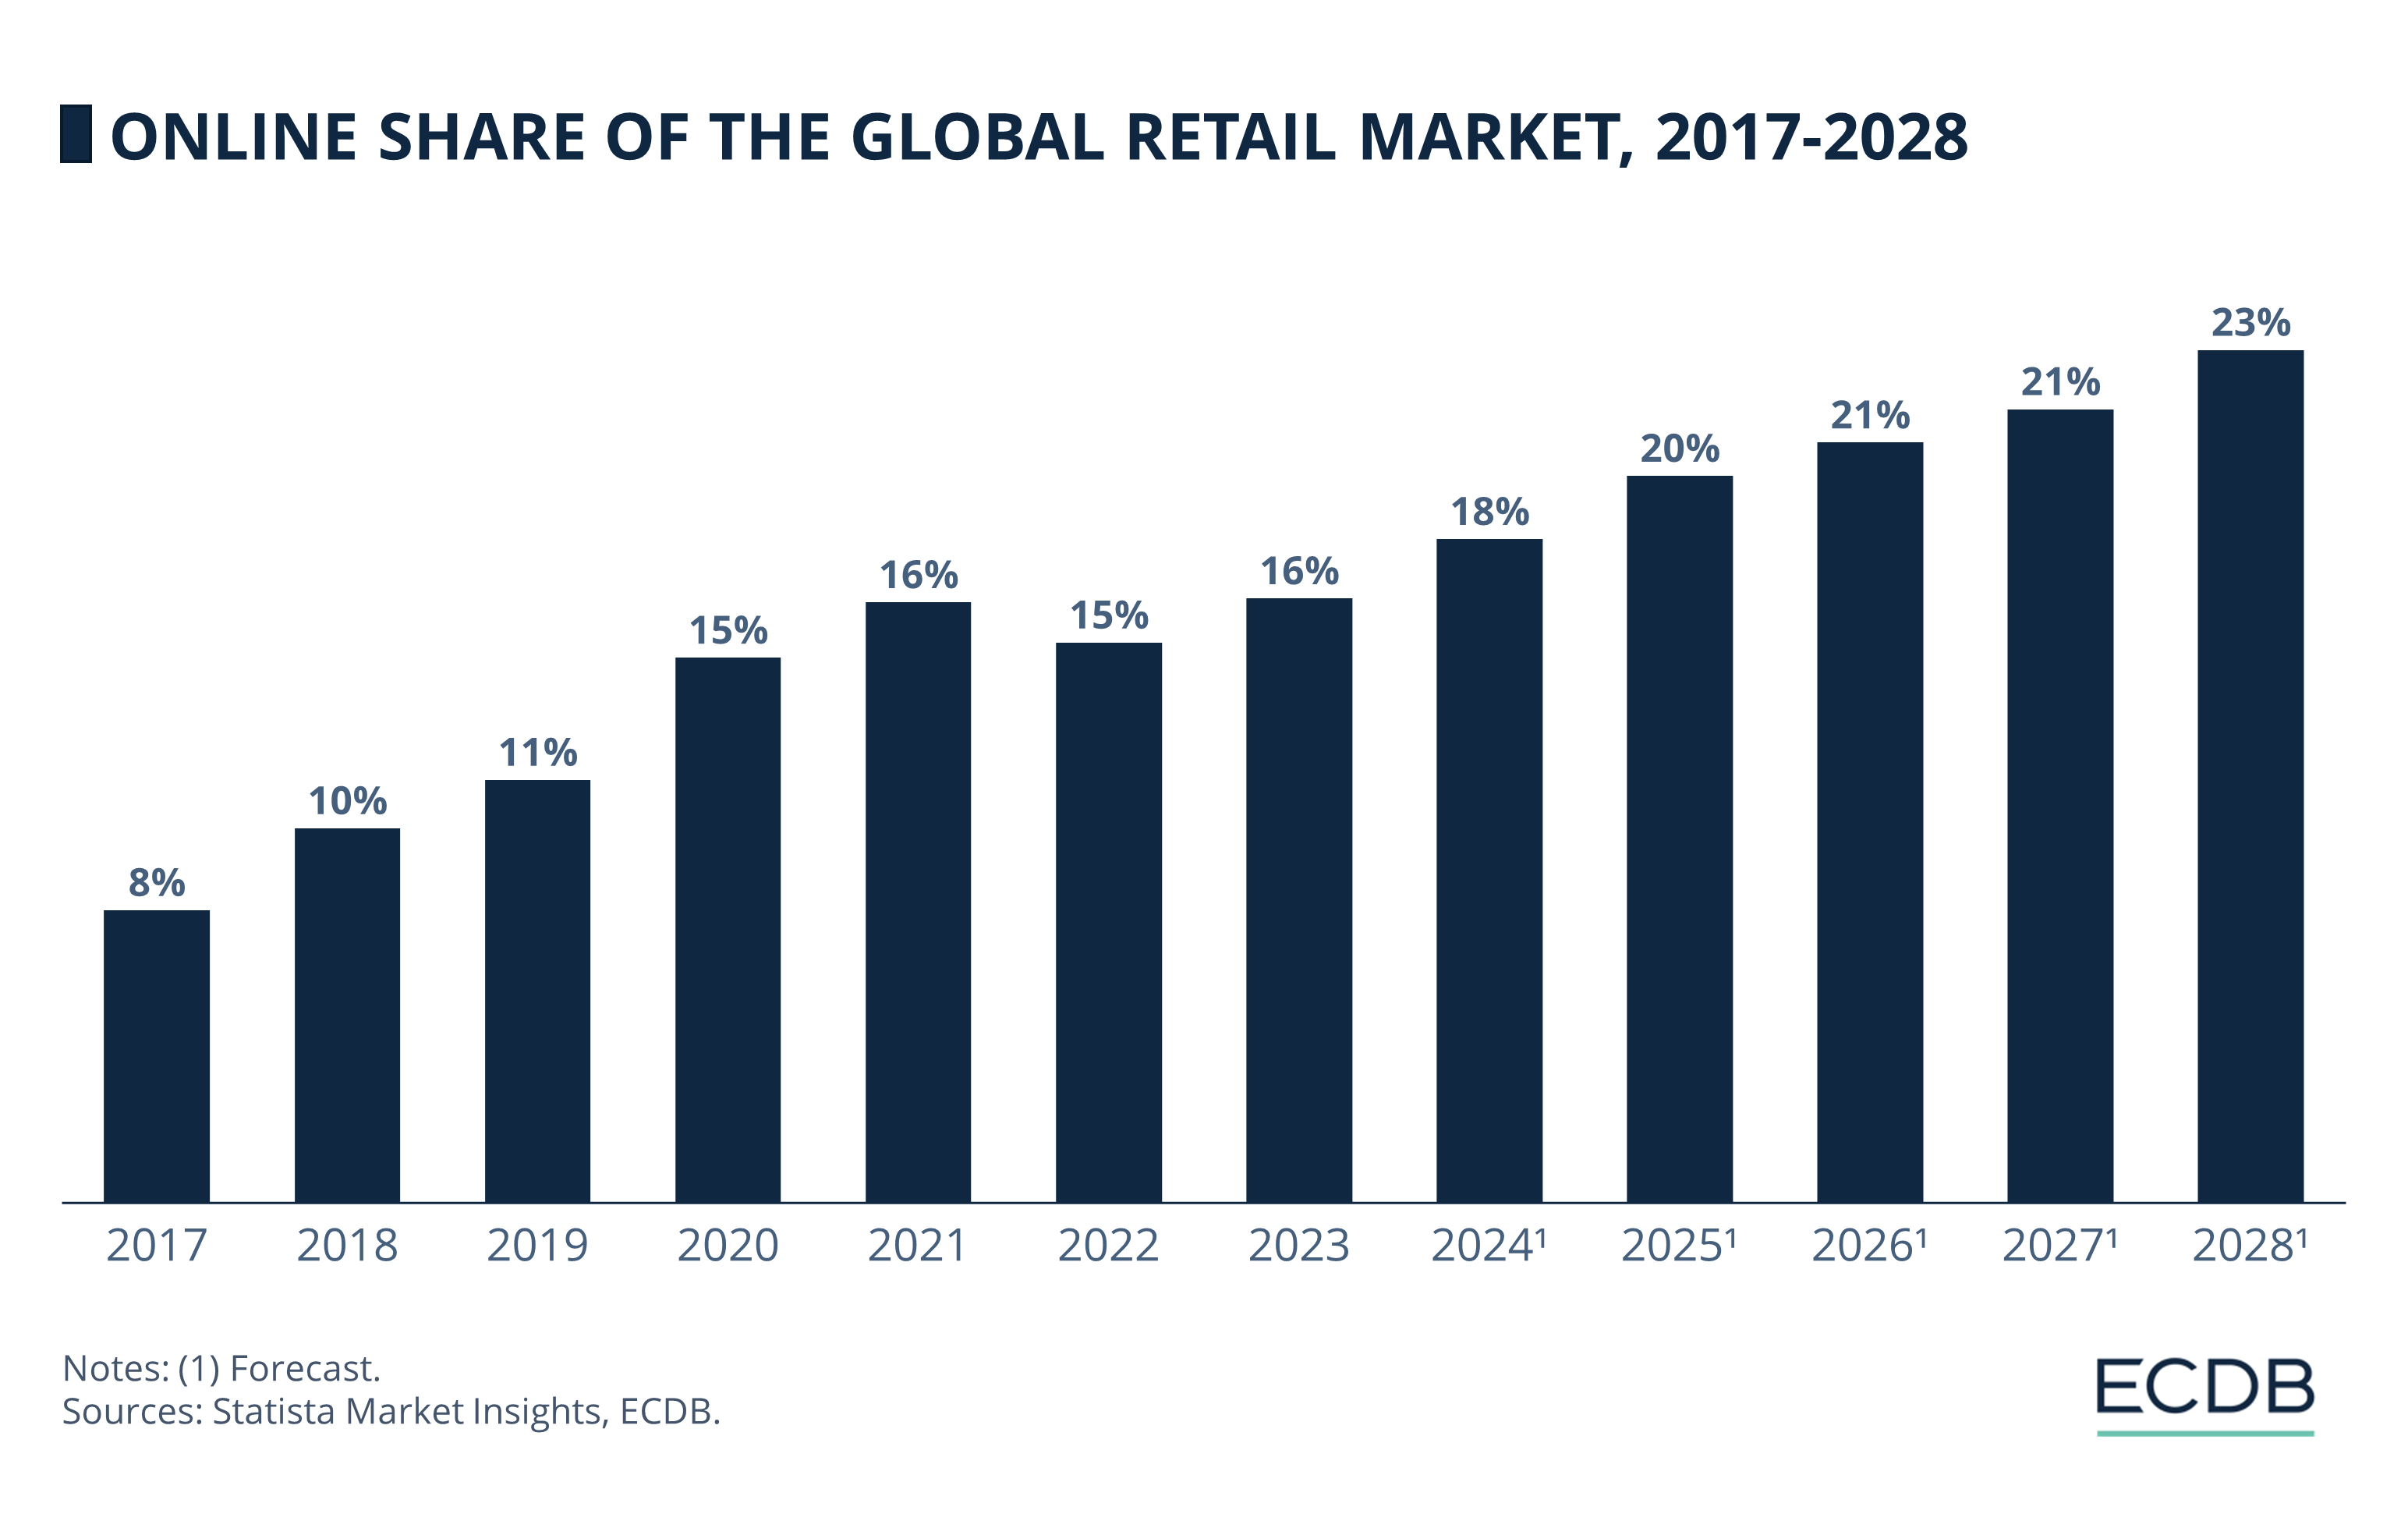 Online Share of the Global Retail Market, 2017-2028